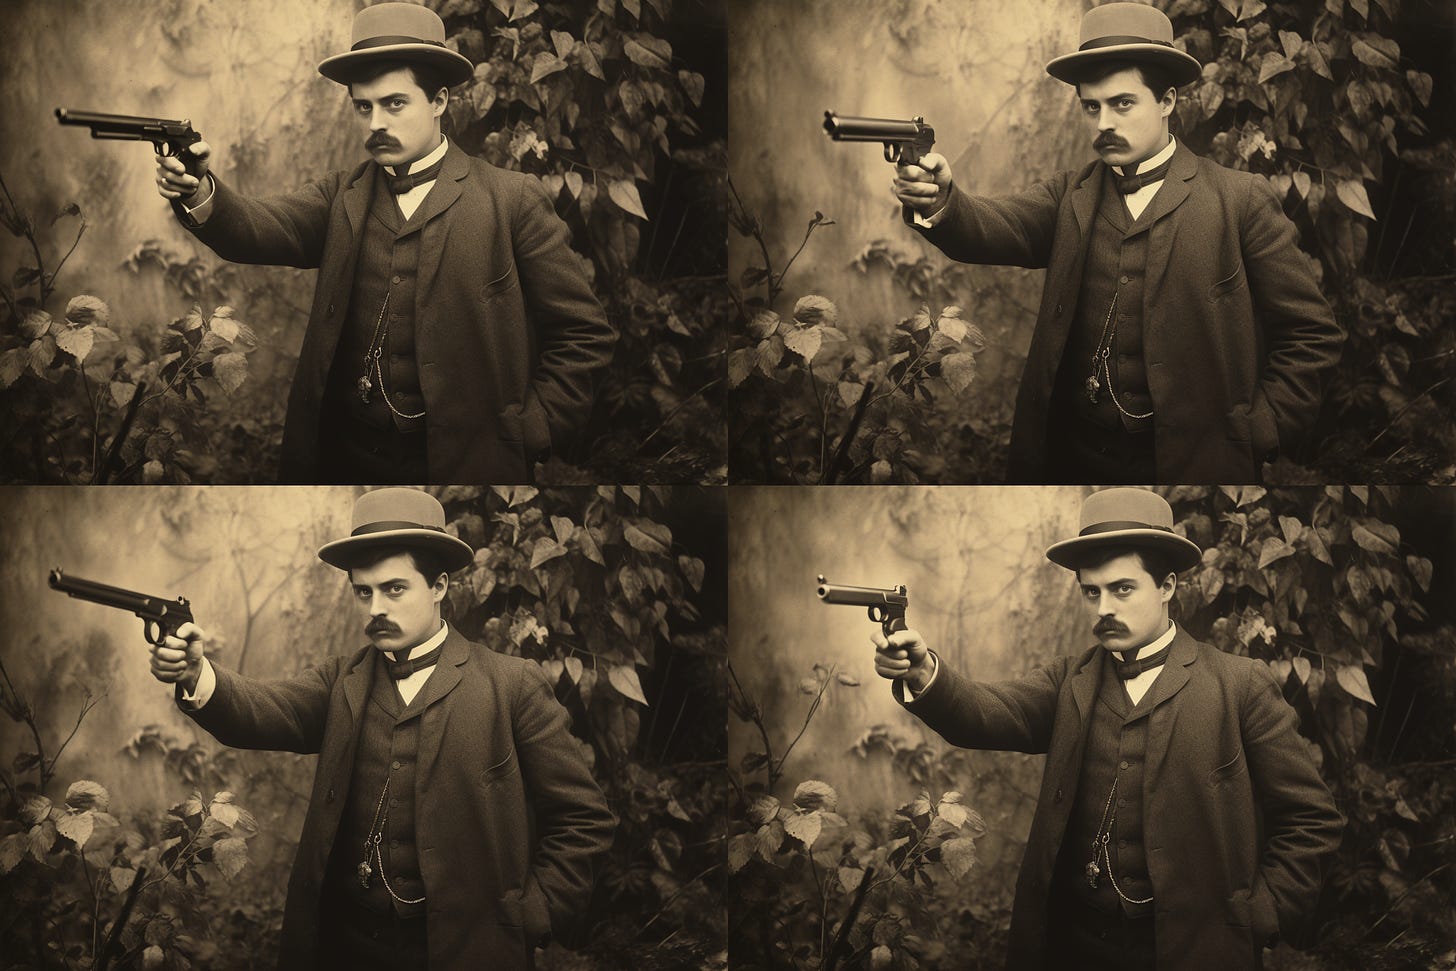 4-image grid with variations of the original Victorian man with a gun